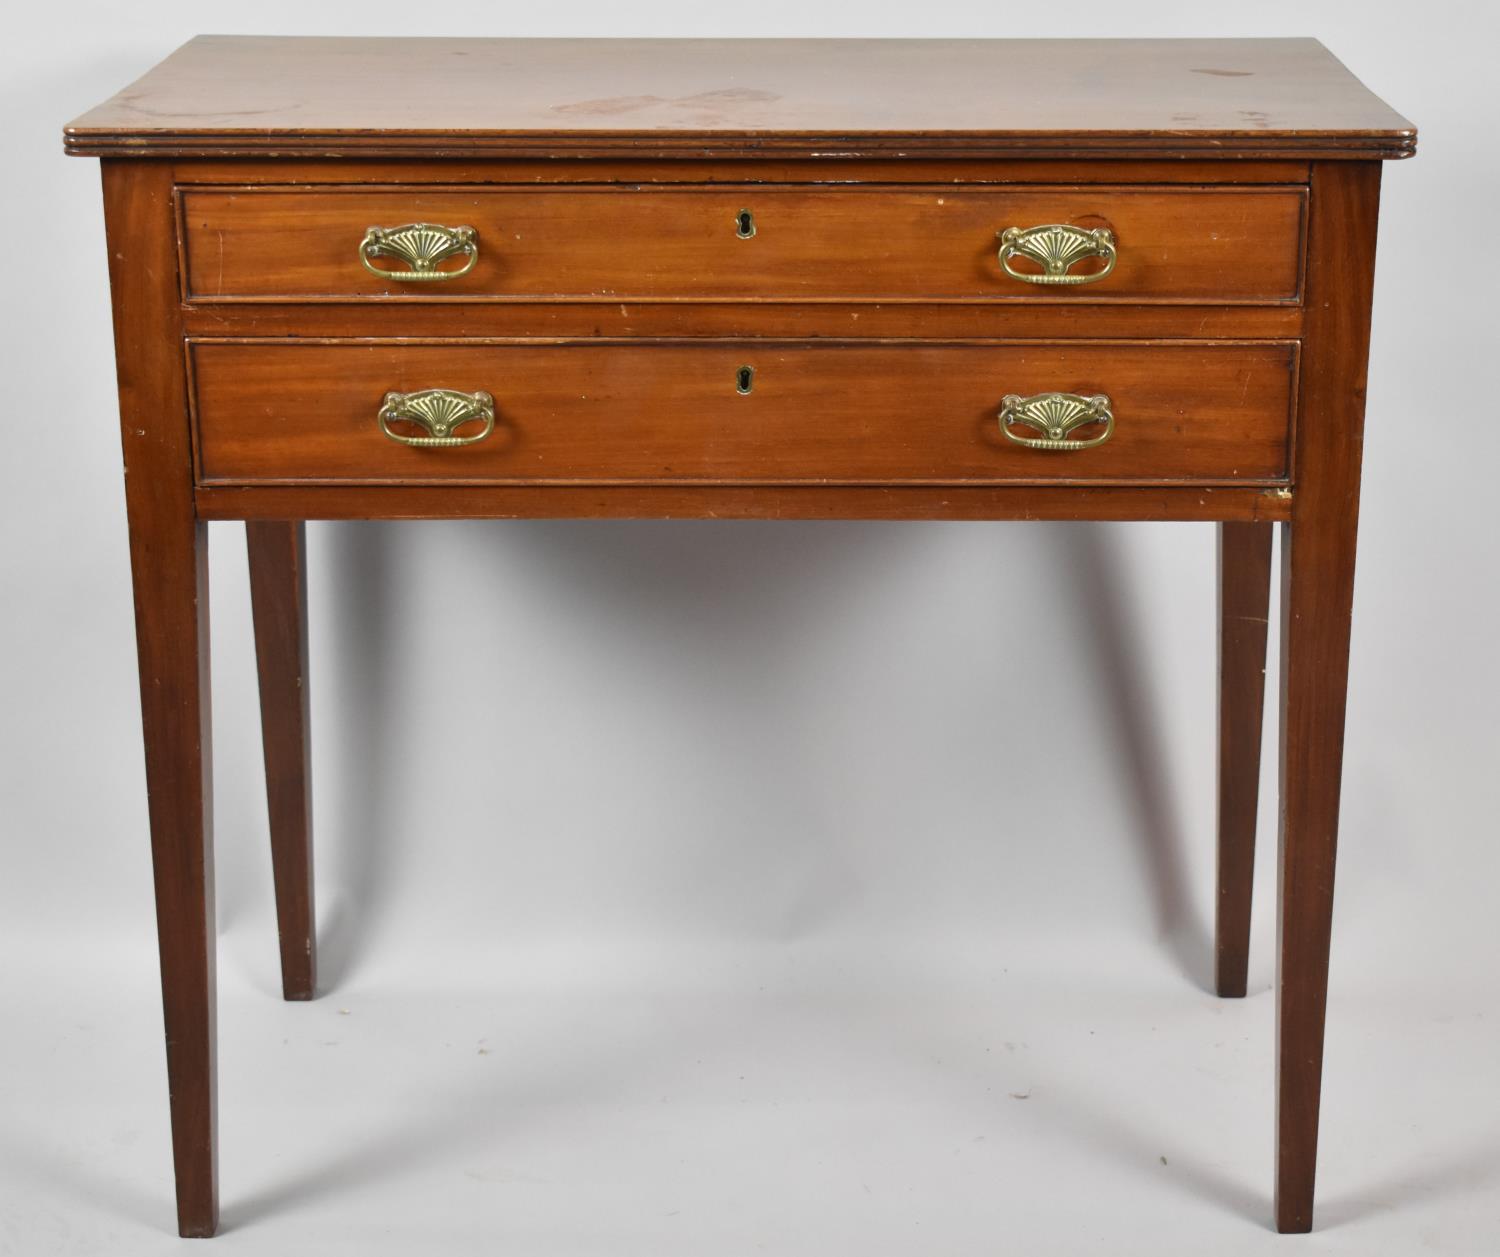 A Late 19th/Early 20th Century Two Drawer Side Table with Label for White & Co., Torquay on Square